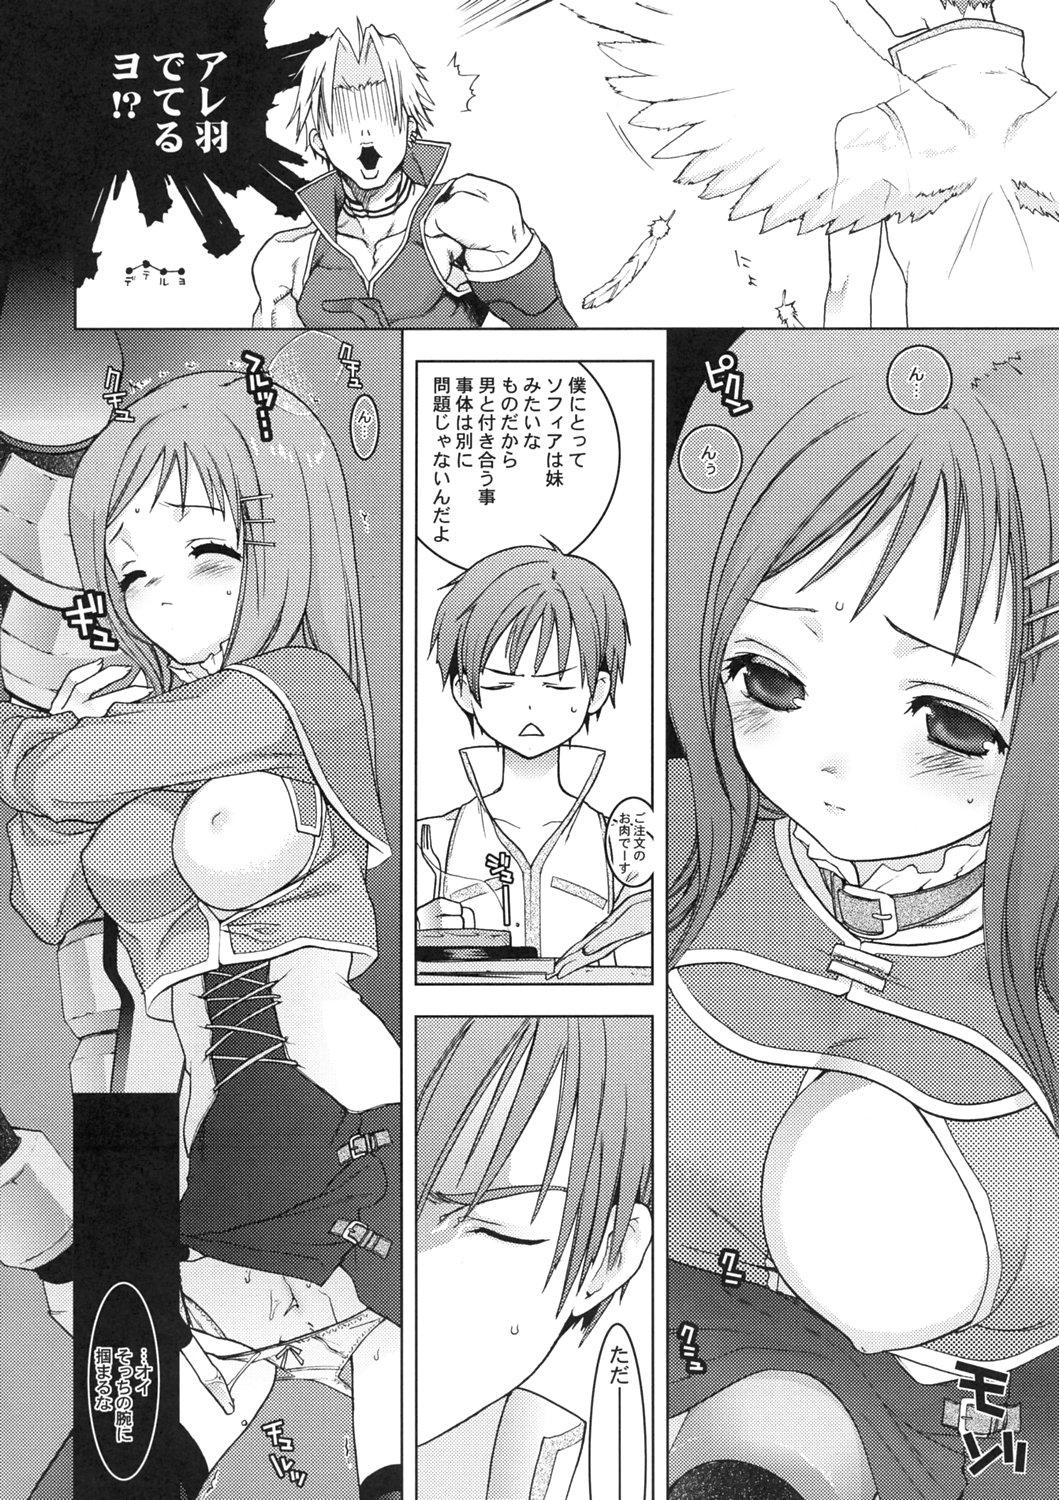 Hot Blow Jobs 108 Candys 3.5 - Star ocean 3 Korea - Page 7